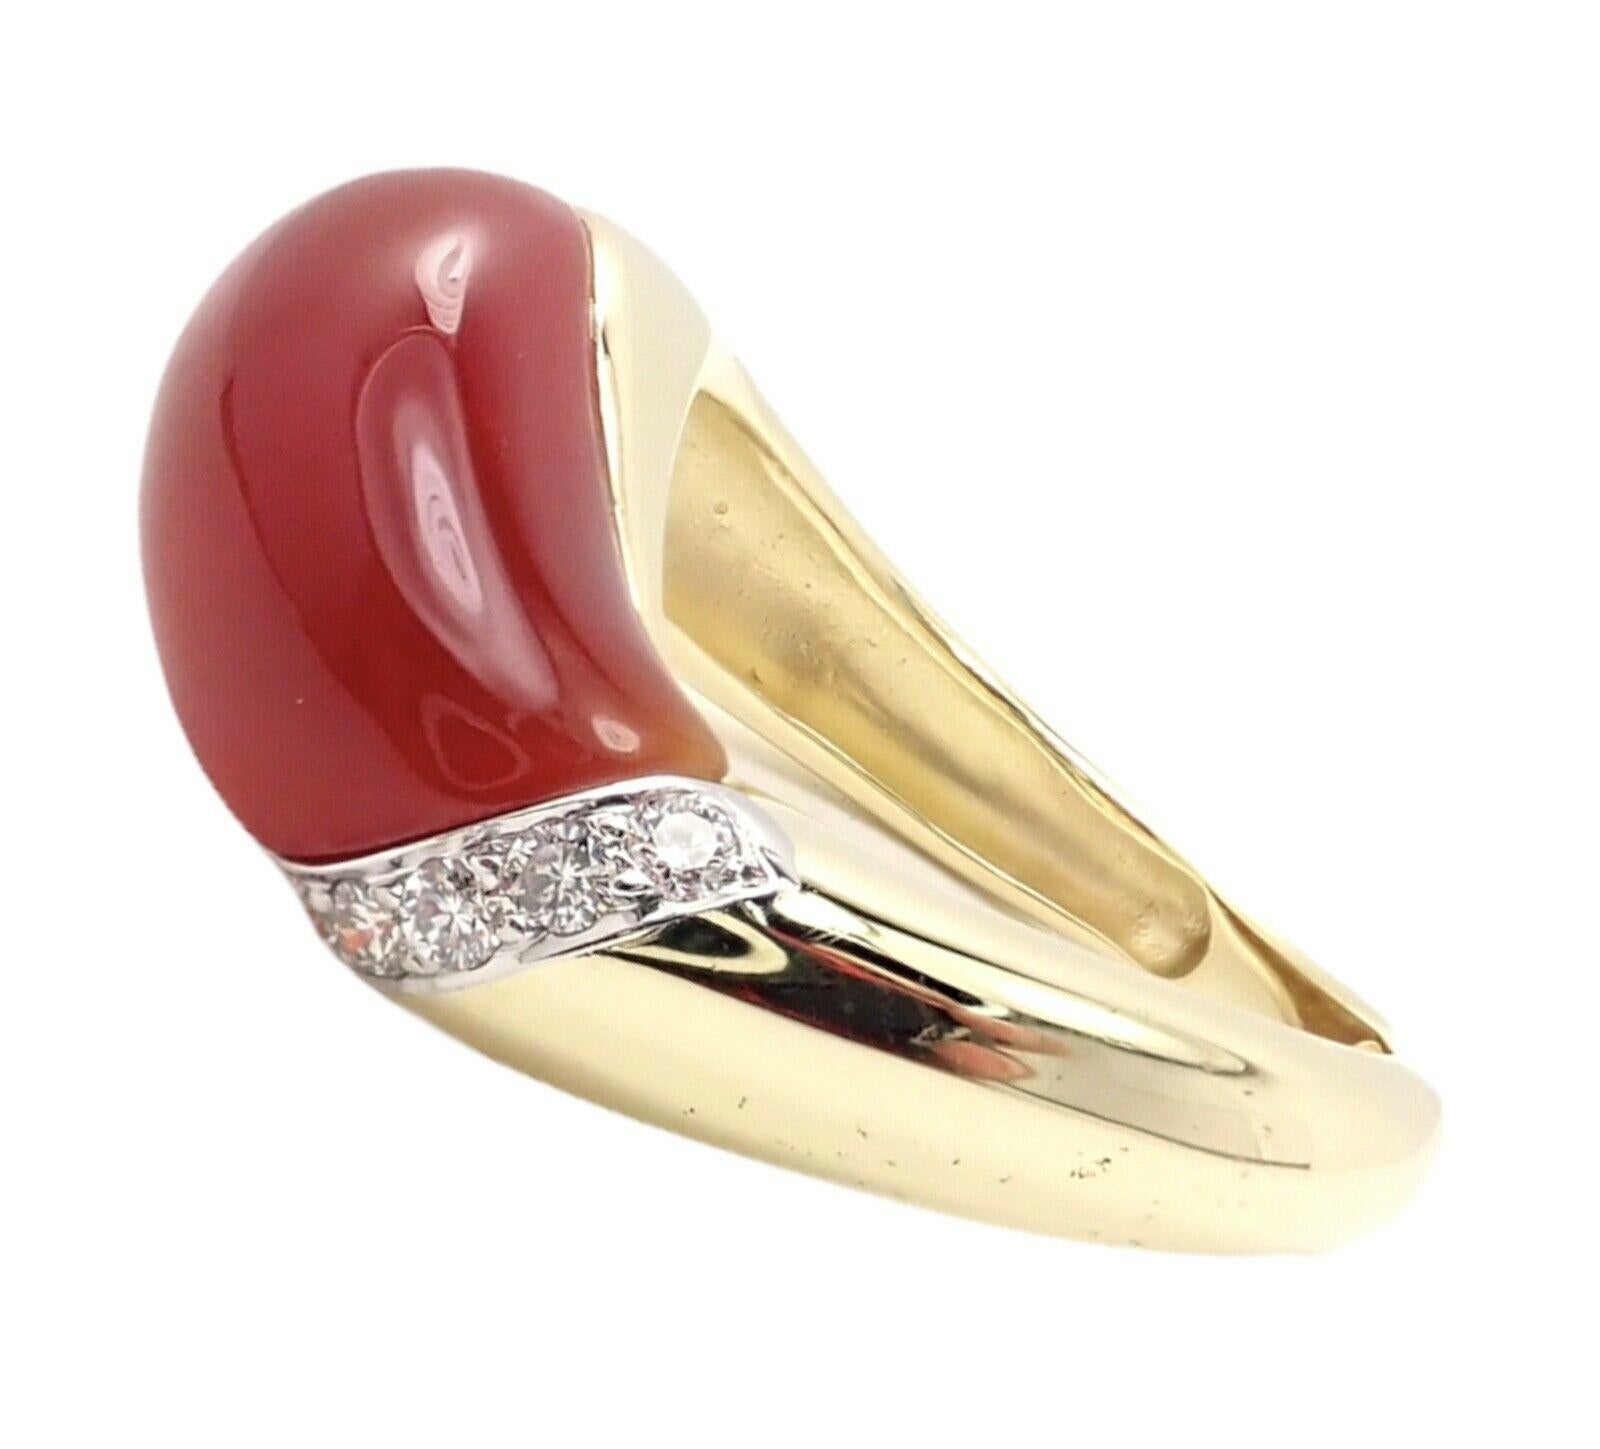 18k Yellow Gold Diamond Curved Carnelian Band Ring by Tiffany & Co. 
With 7 Round Brilliant Cut Diamonds VS1 clarity, G color, Total weight Approx .14ctw
1 Curved Carnelian 8mm x 15mm 
Details: 
Size: 6
Width: 9mm  
Weight: 6.3 grams
Stamped